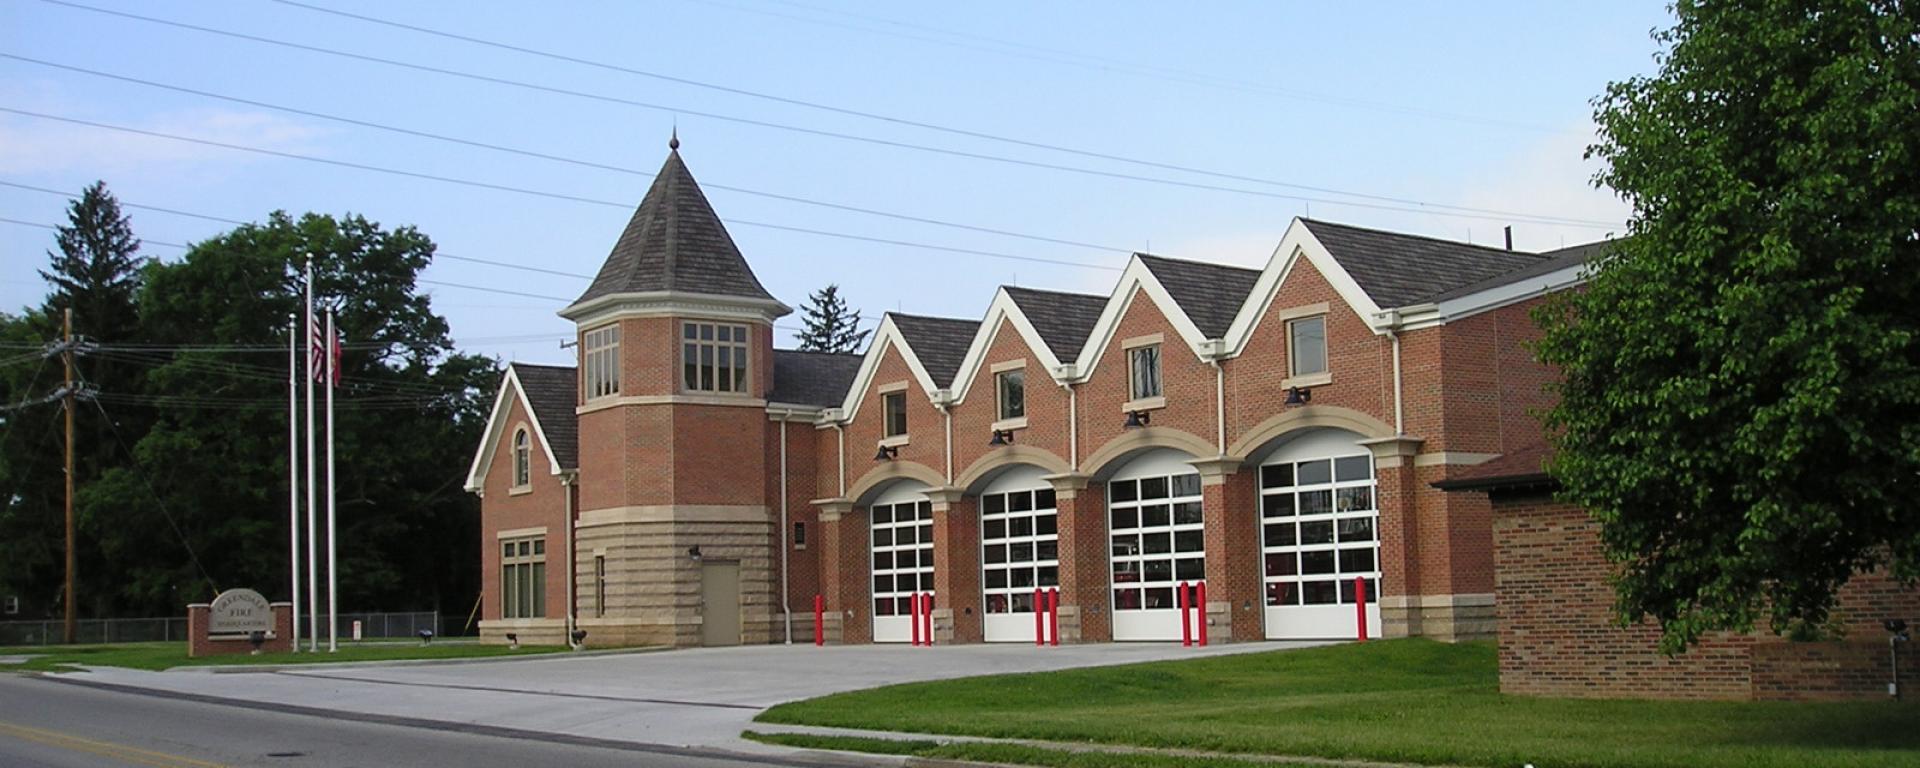 street view of firehouse front and garage doors